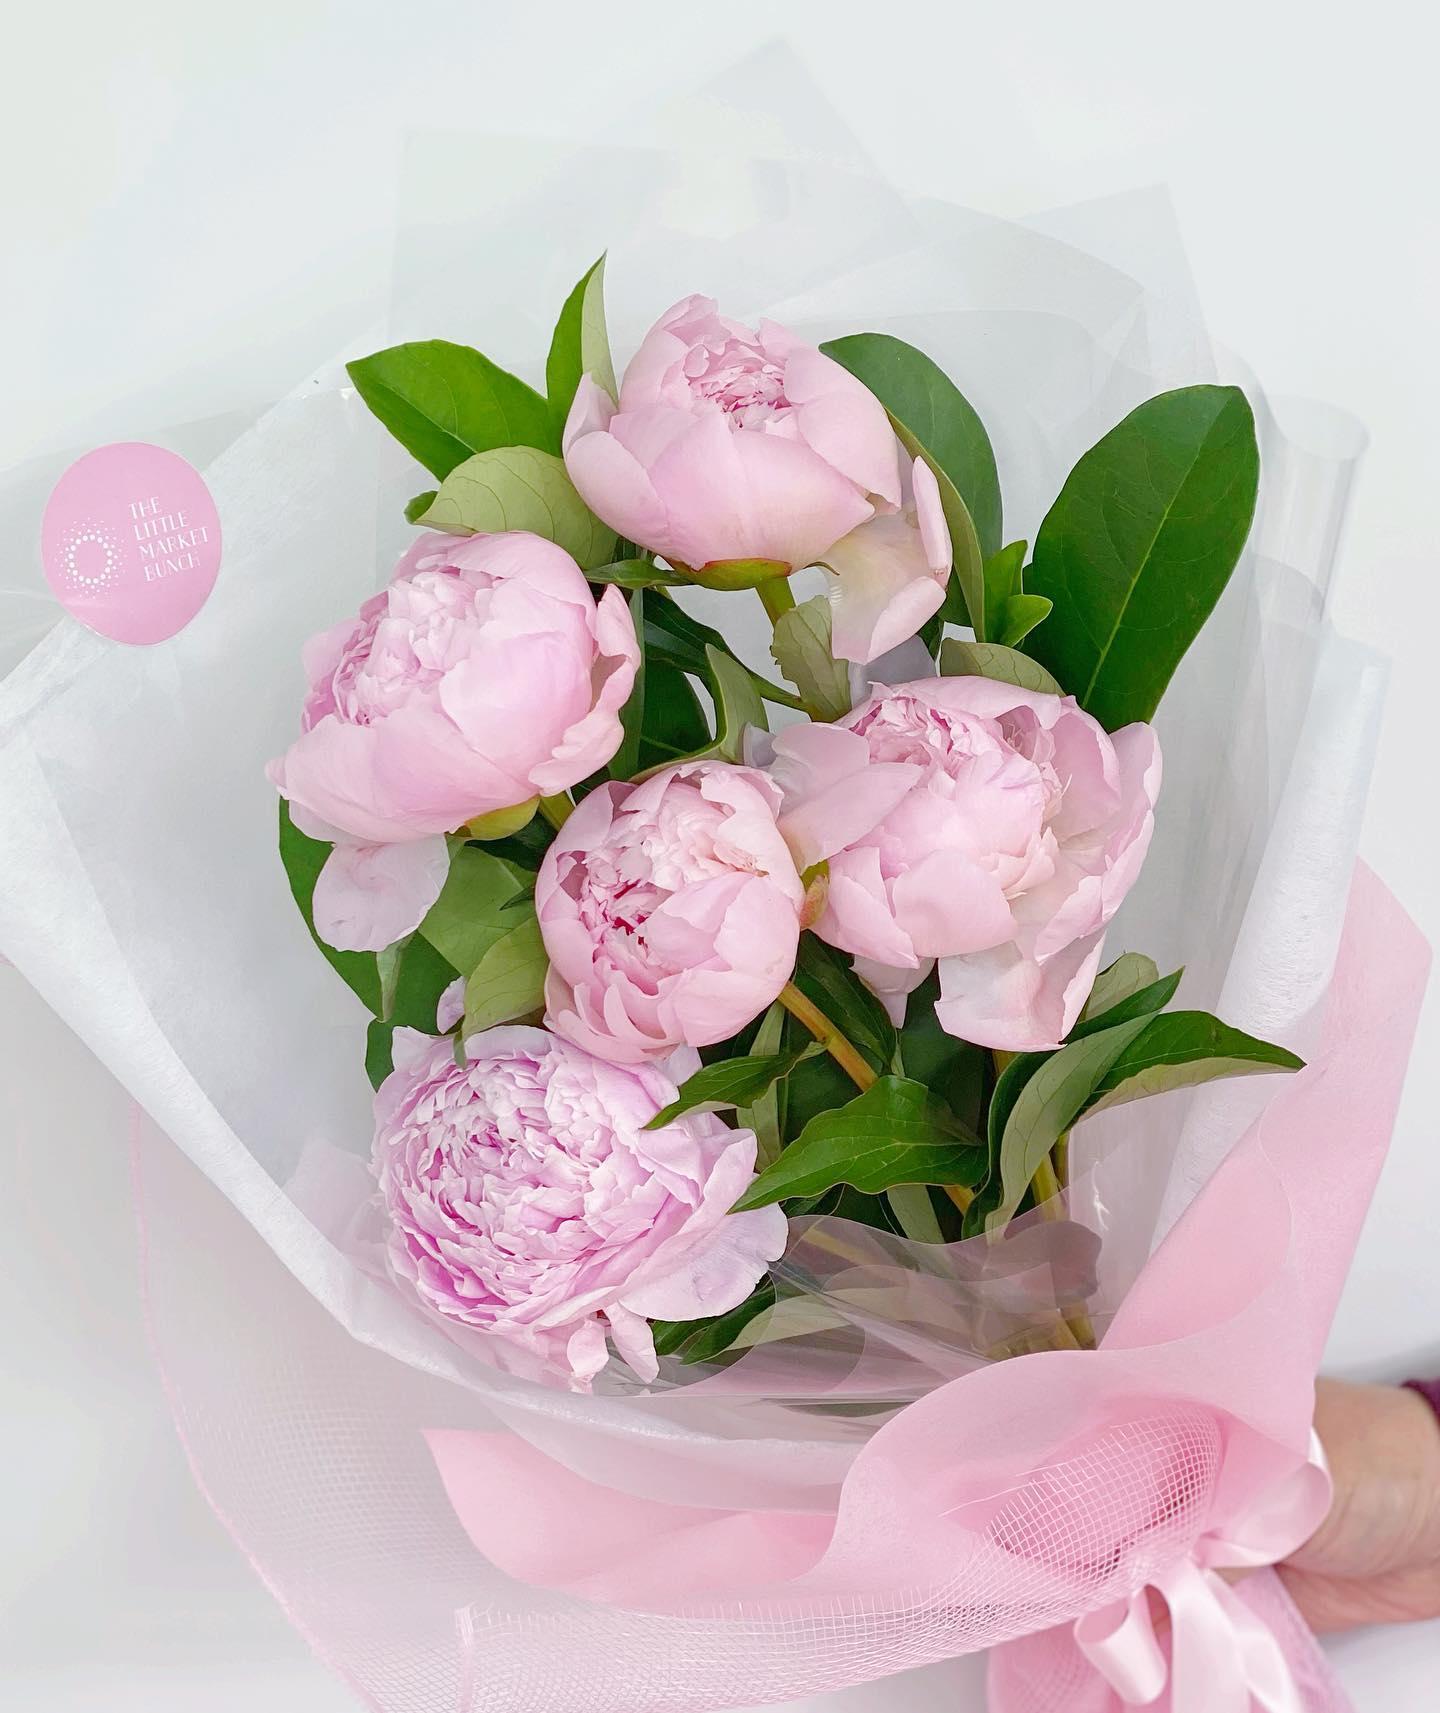 flower delivery Melbourne | The little market bunch | 6/46 Export Dr, Brooklyn VIC 3012, Australia | Phone: 0452 554 811